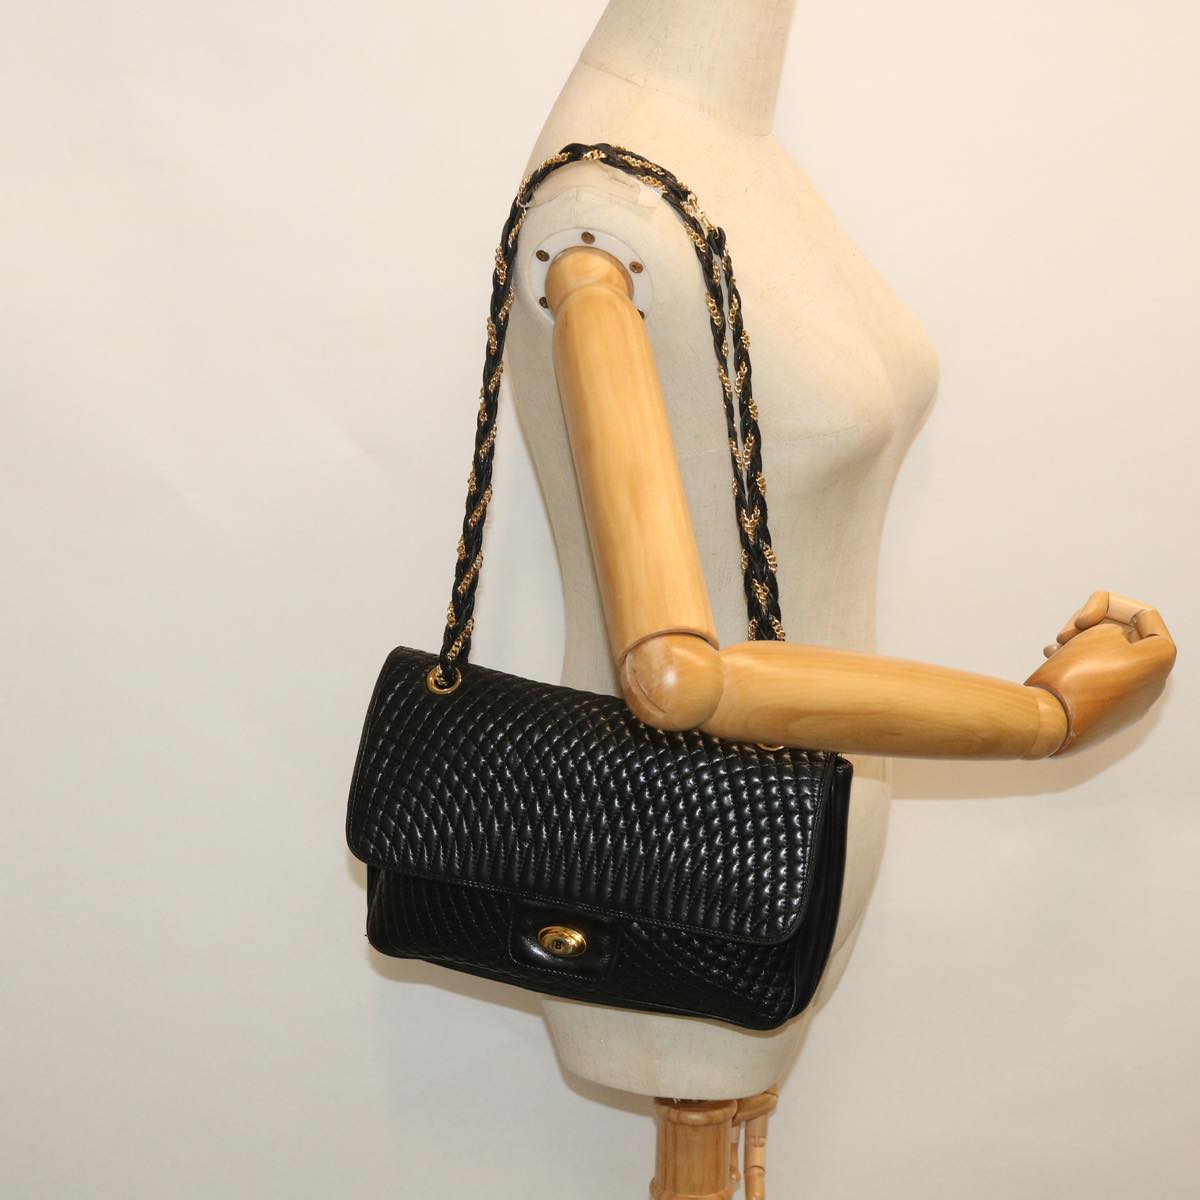 BALLY Chain Shoulder Bag Leather Black Auth bs8587